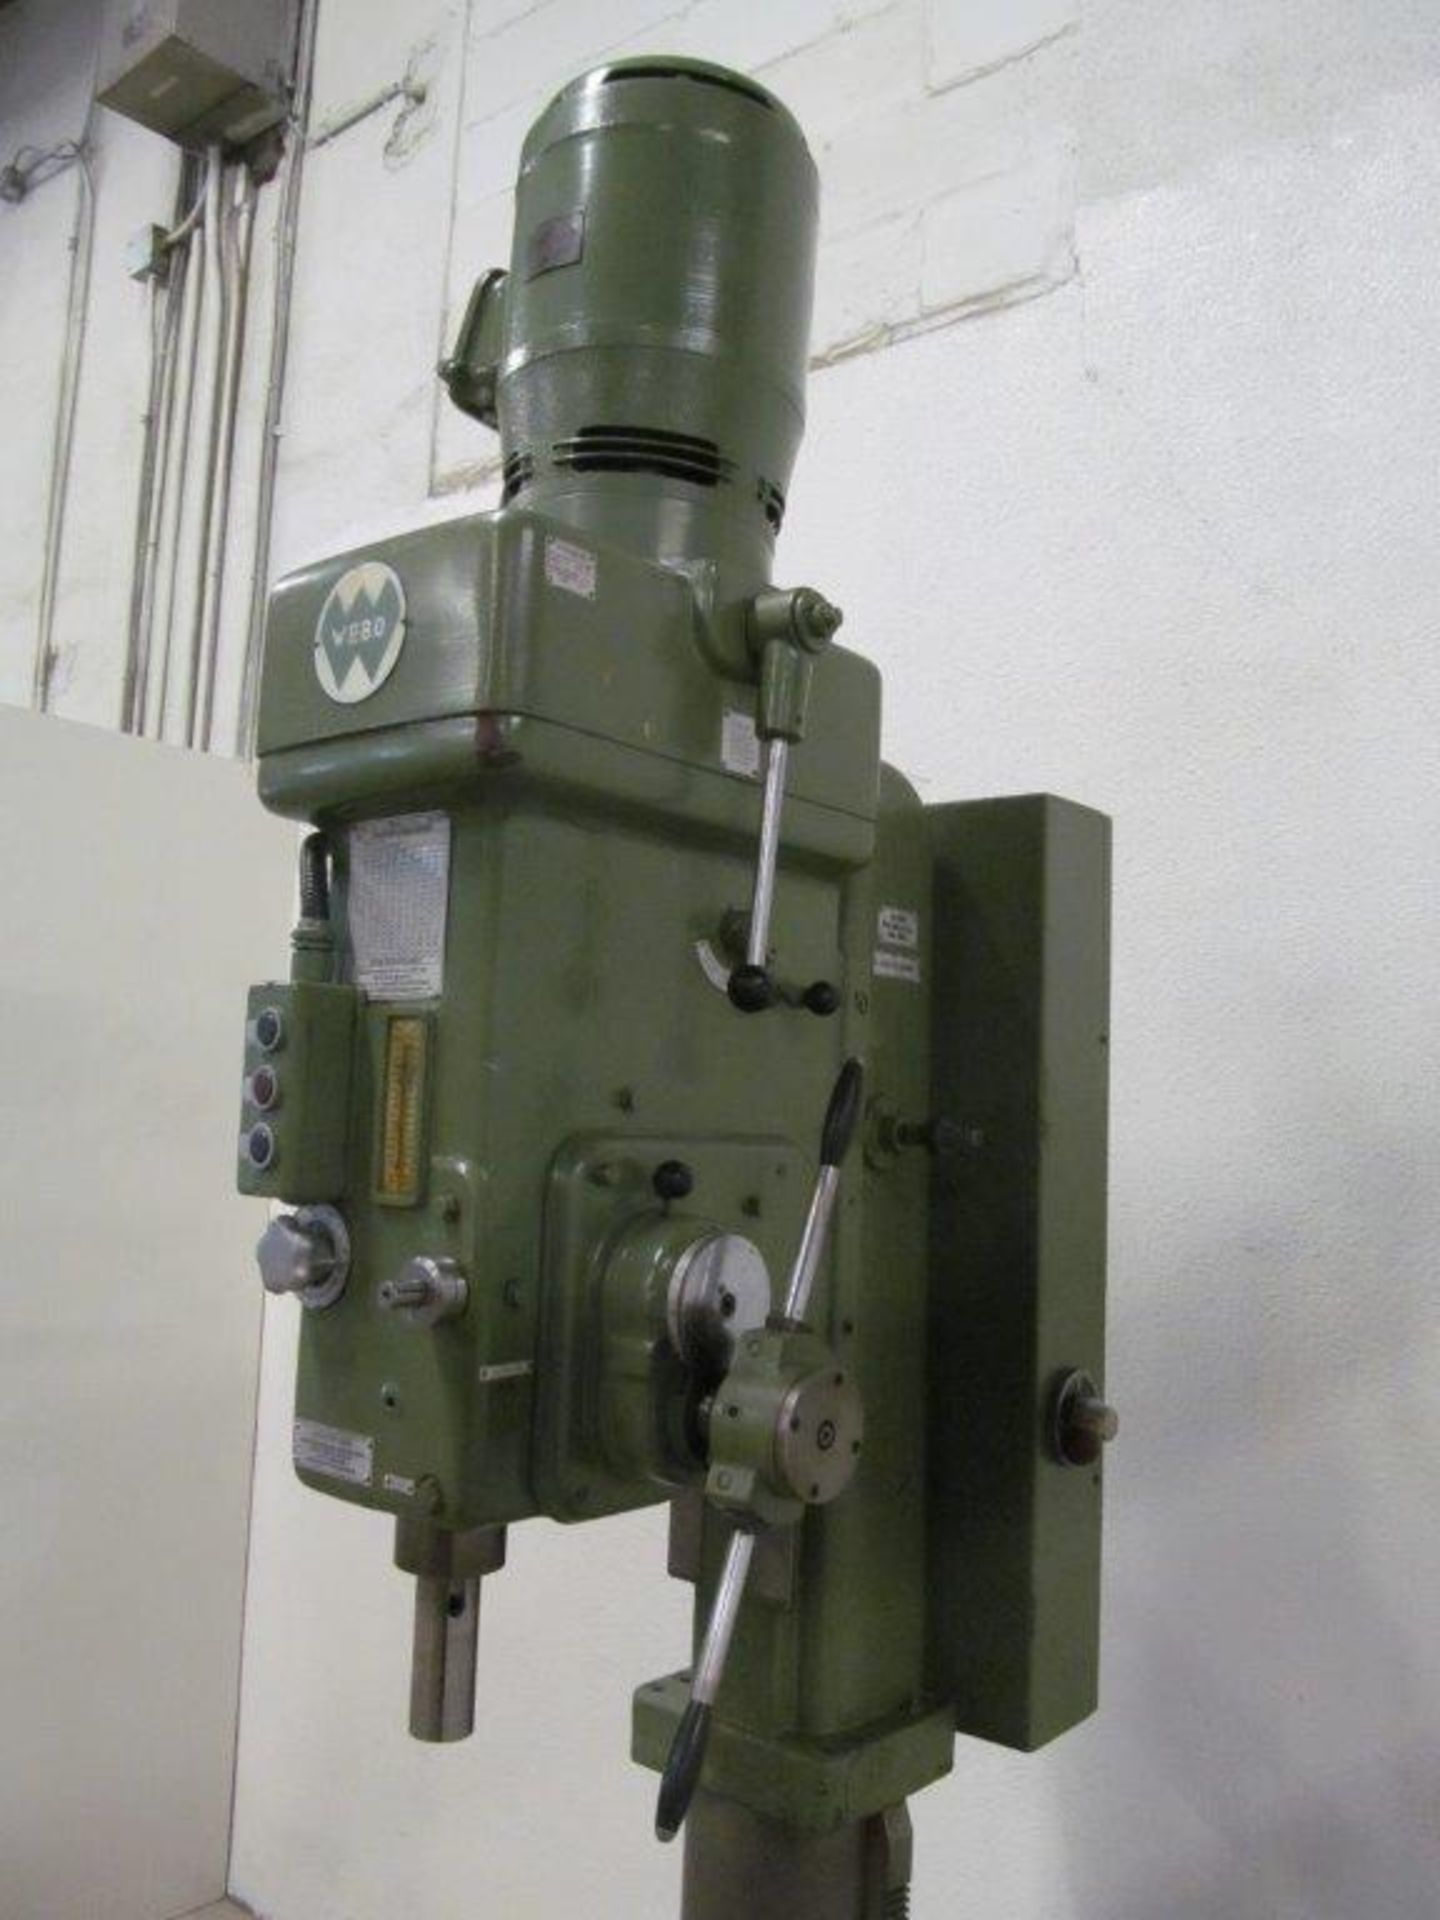 WEBO (GERMANY) HEAVY DUTY GEARED HEAD DRILL PRESS MT4 SPINDLE 1 9/16'' DRILLING CAPACITY, ELECTRICS: - Image 5 of 9